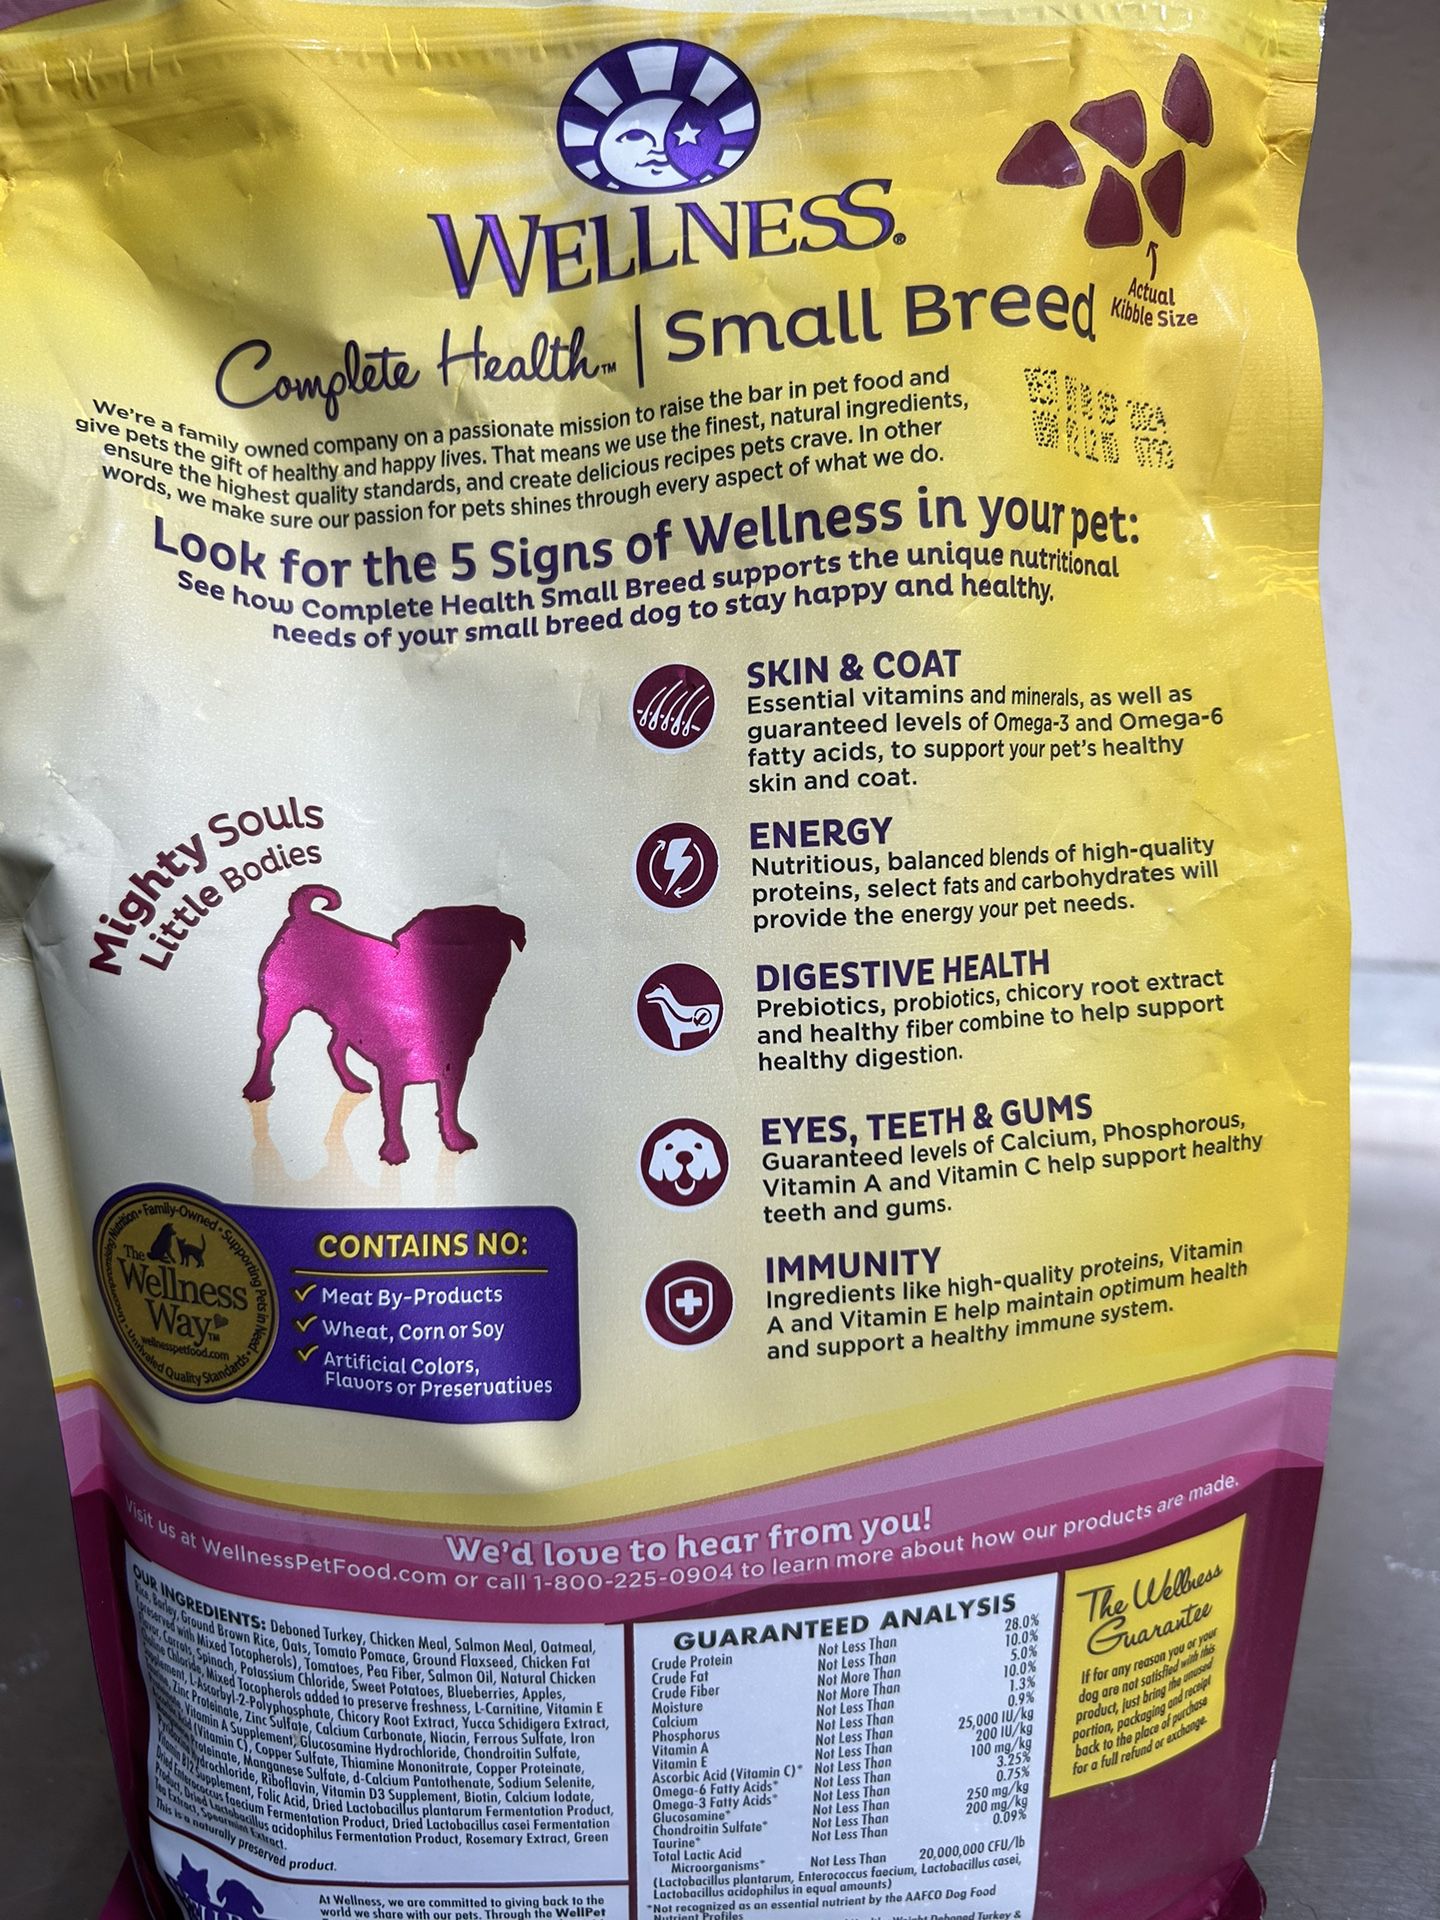 Unopened Brand New Bag Of Wellness Small Dog Food And One Bag Half Gone 